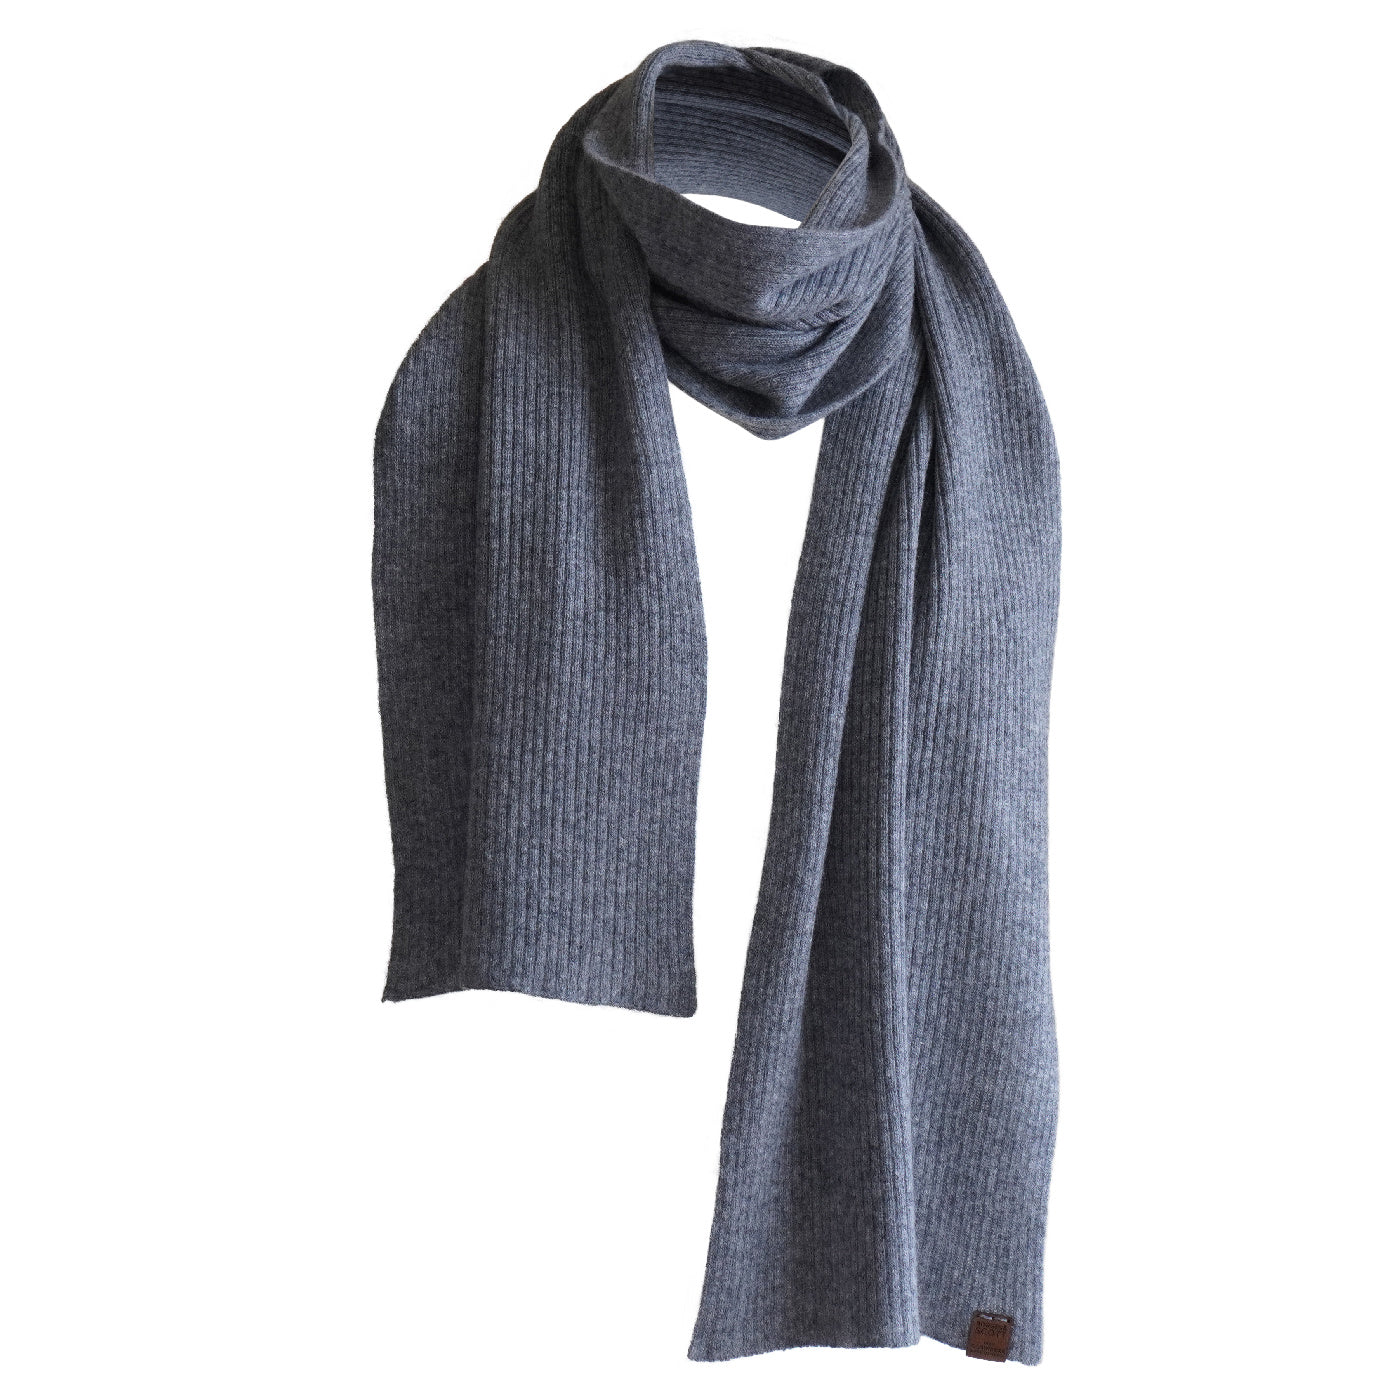 Luxurious Cashmere Scarf from Nepal